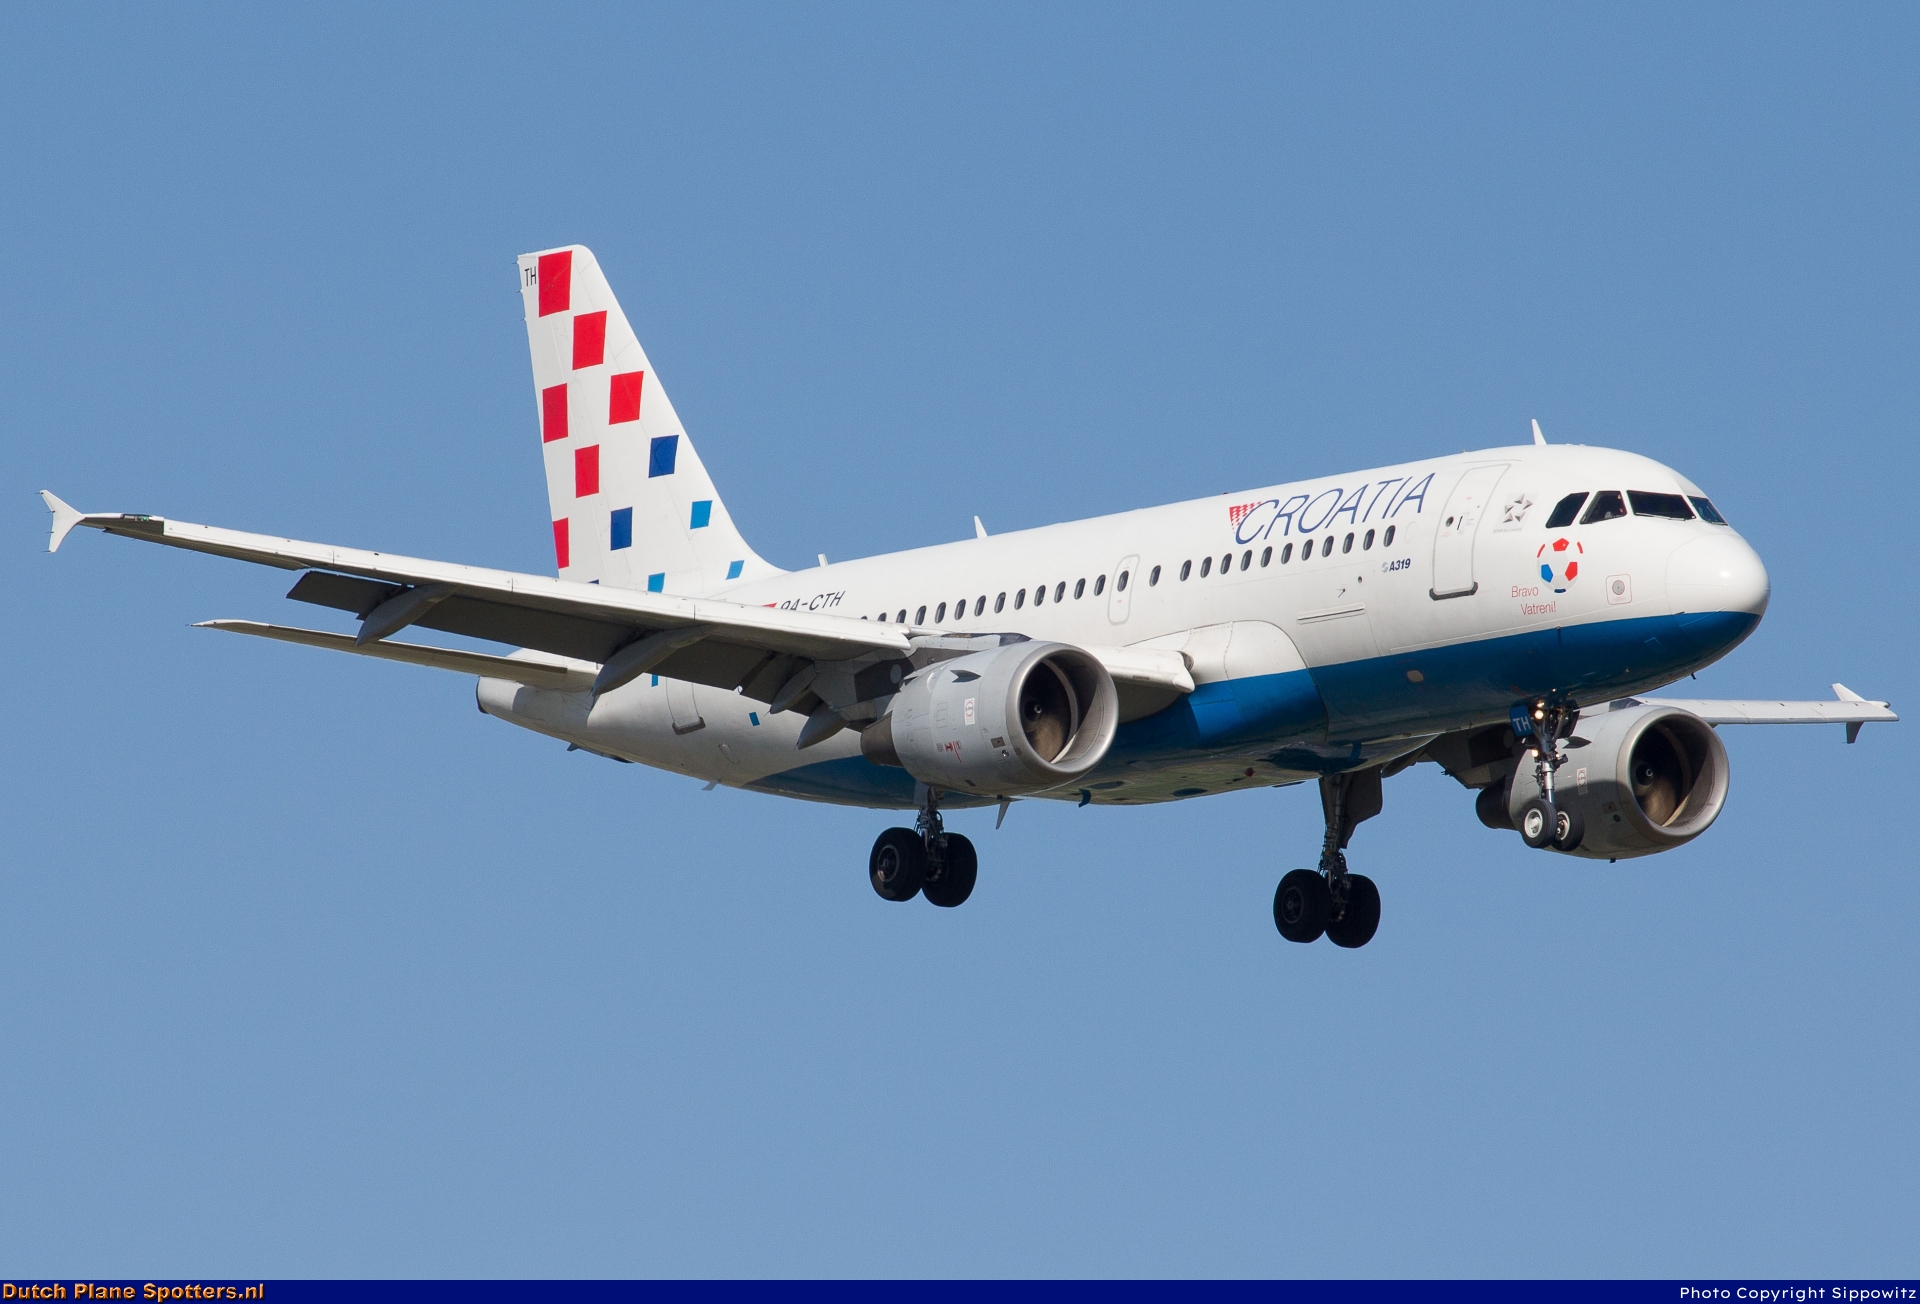 9A-CTH Airbus A319 Croatia Airlines by Sippowitz